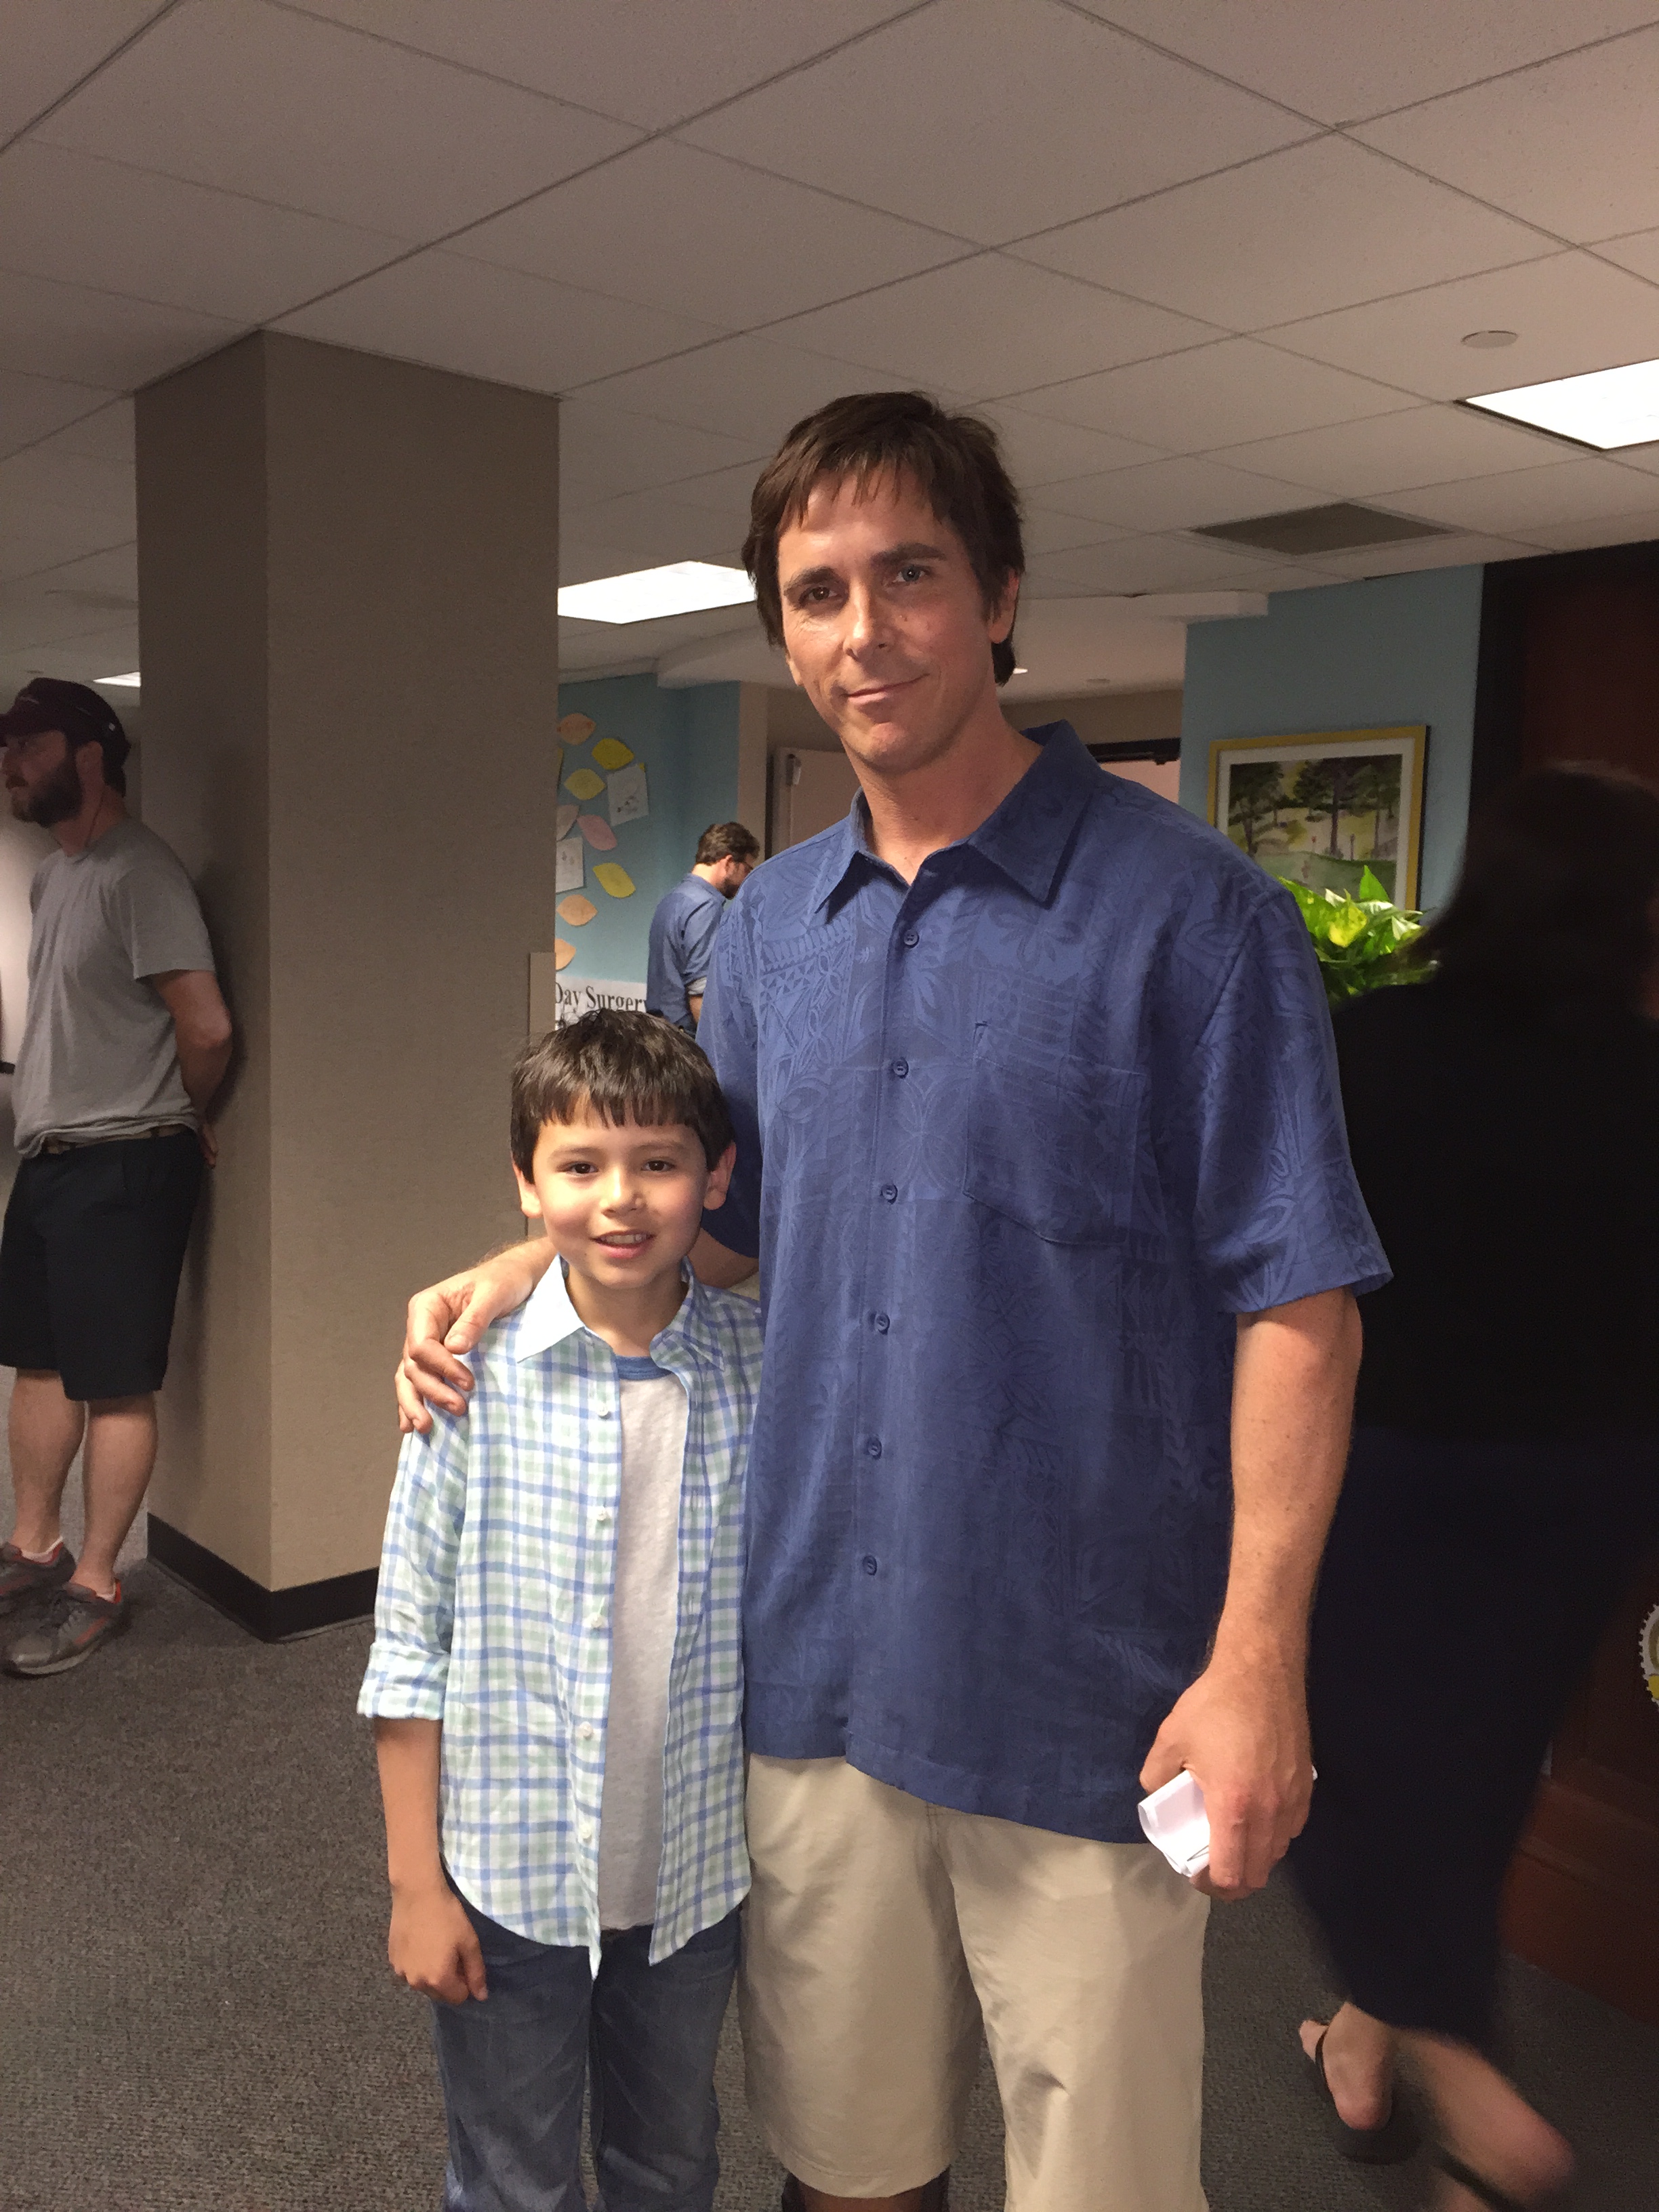 Colin Lawless with Christian Bale on the set of The Big Short.